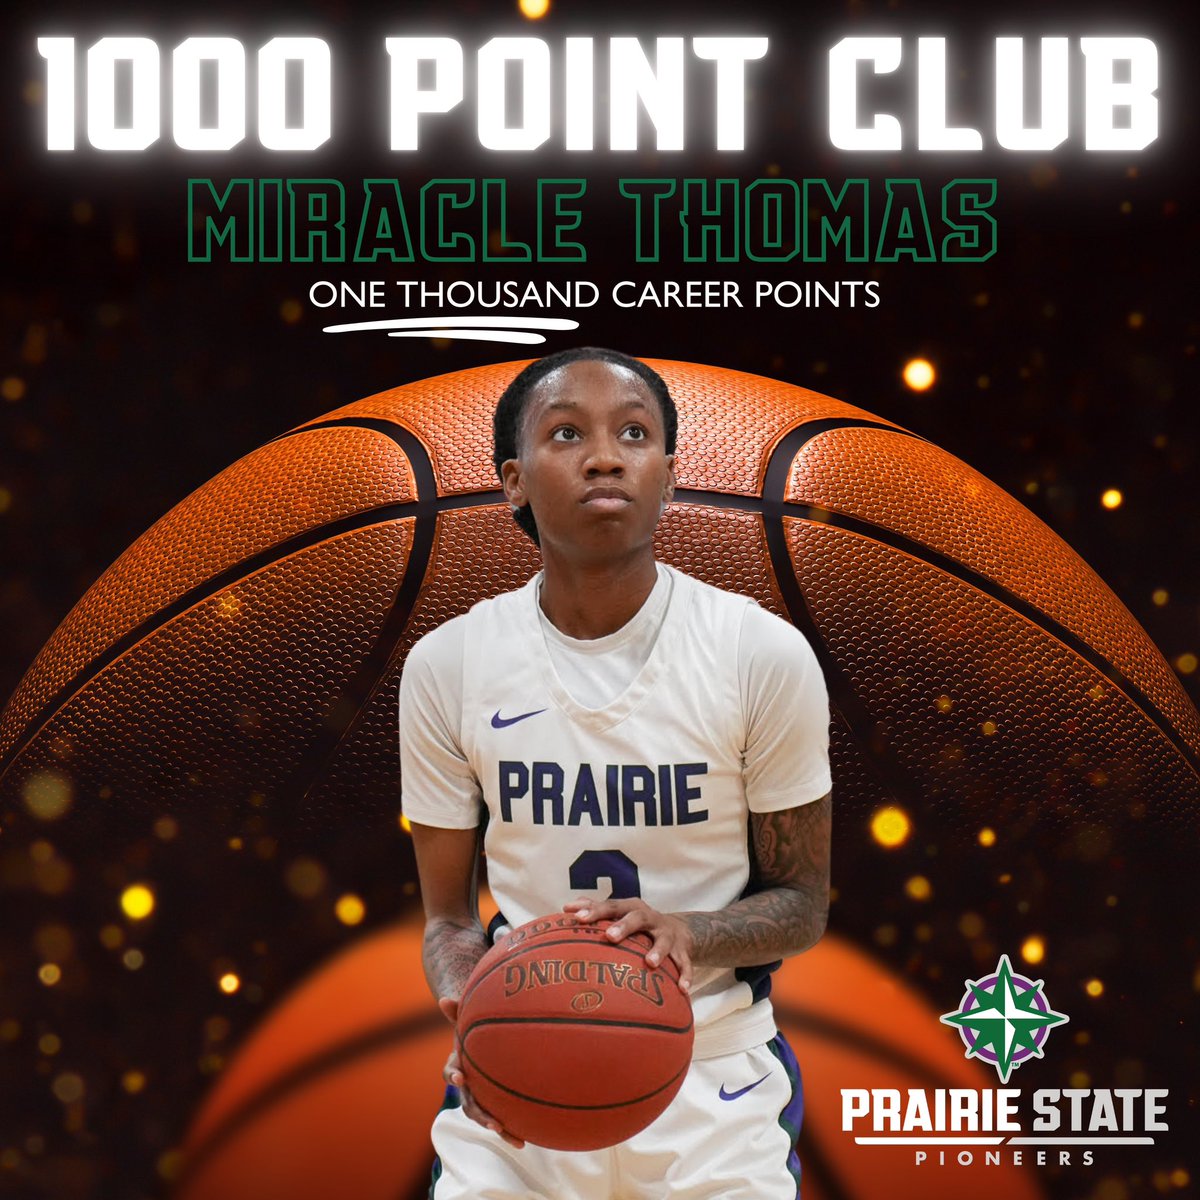 History is made! After a strong first half tonight, Miracle Thomas becomes the first women’s basketball player to reach 1,000 points. Congrats Miracle! #WeArePSC